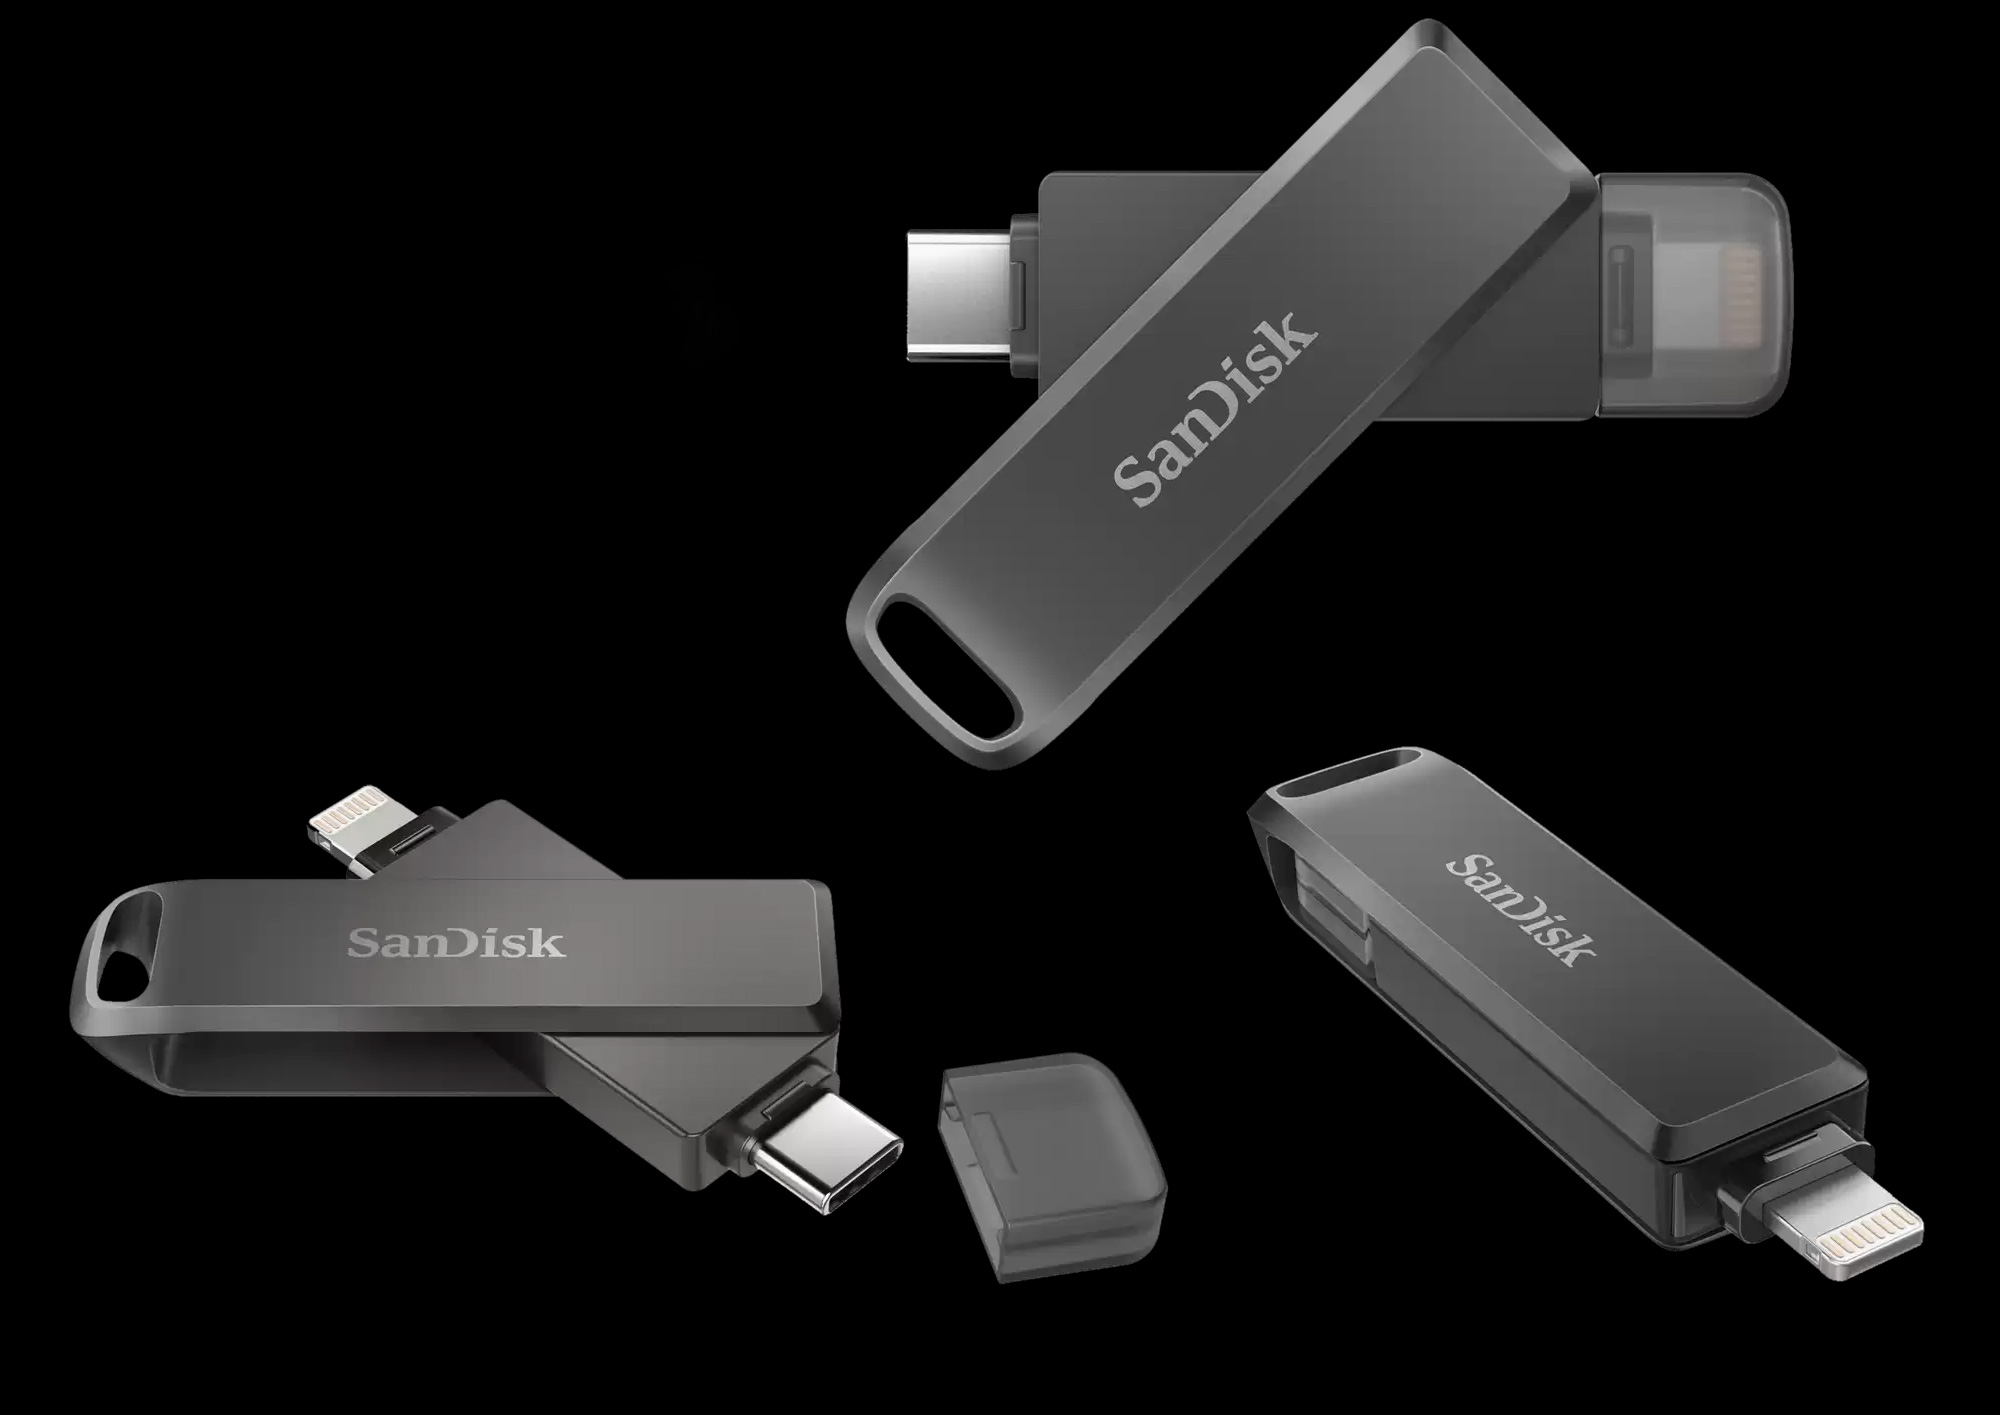 Sandisk’s USB Type-C drive for iPhone and Android